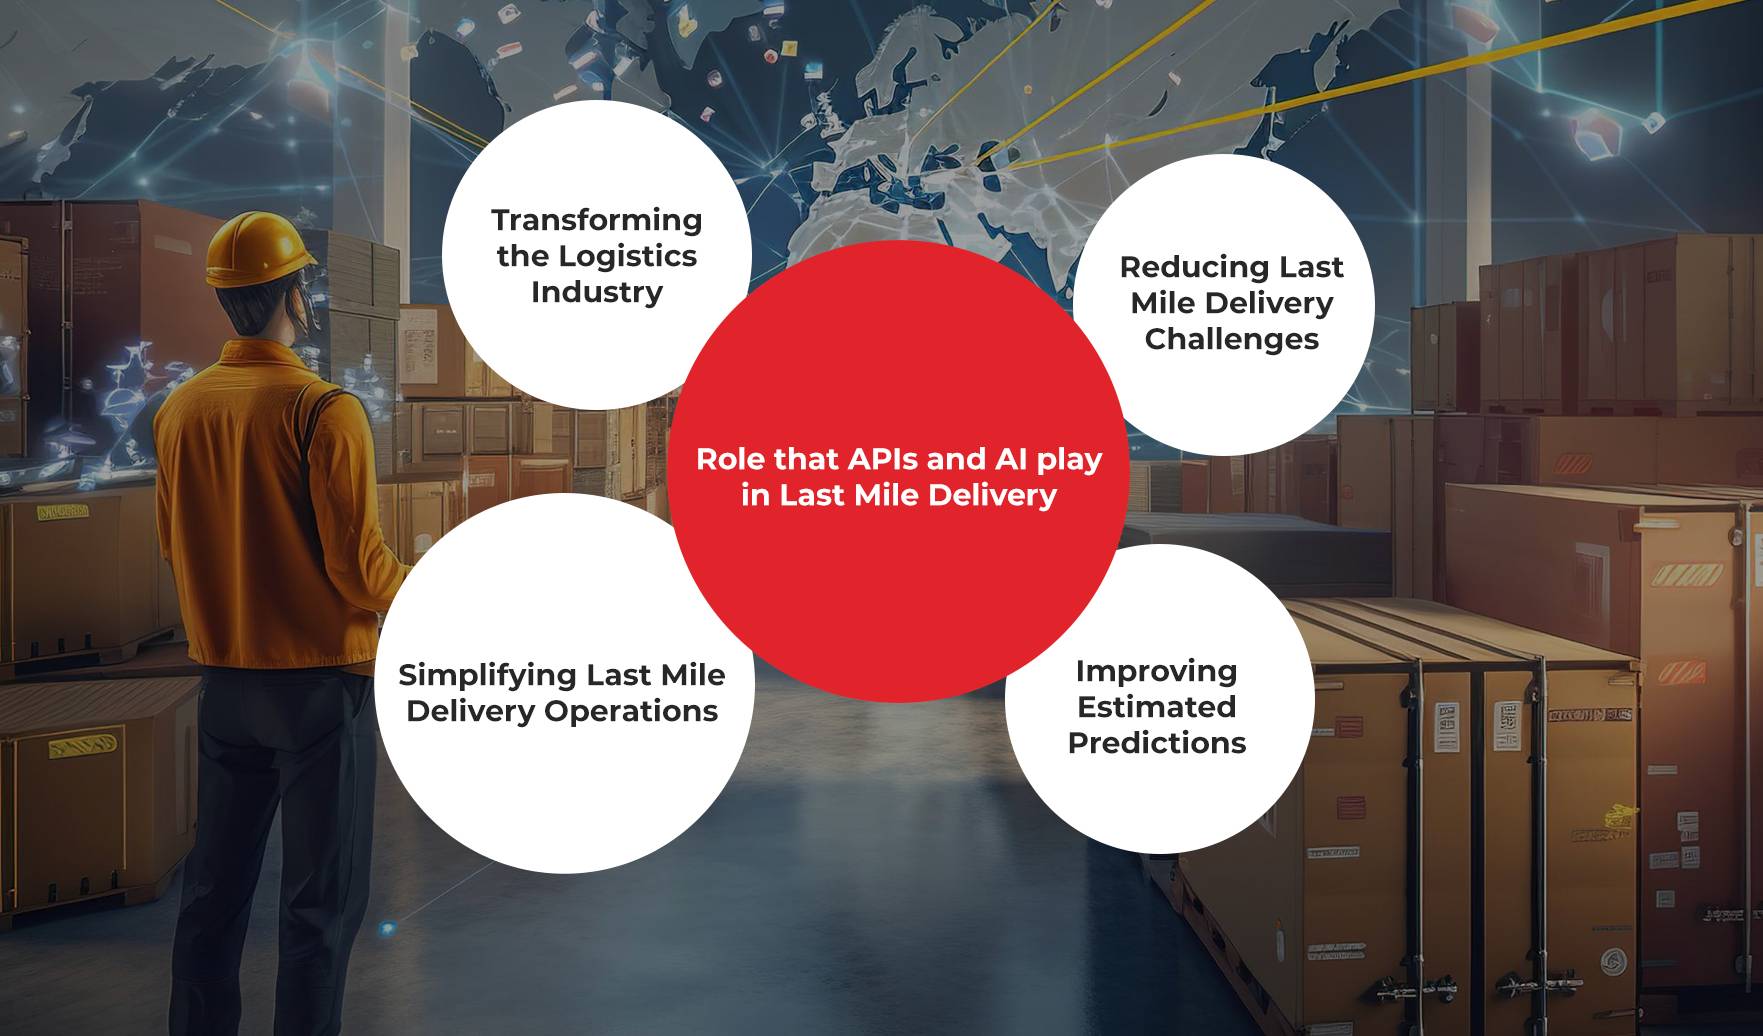 What role does APIs and AI play in Last Mile Delivery